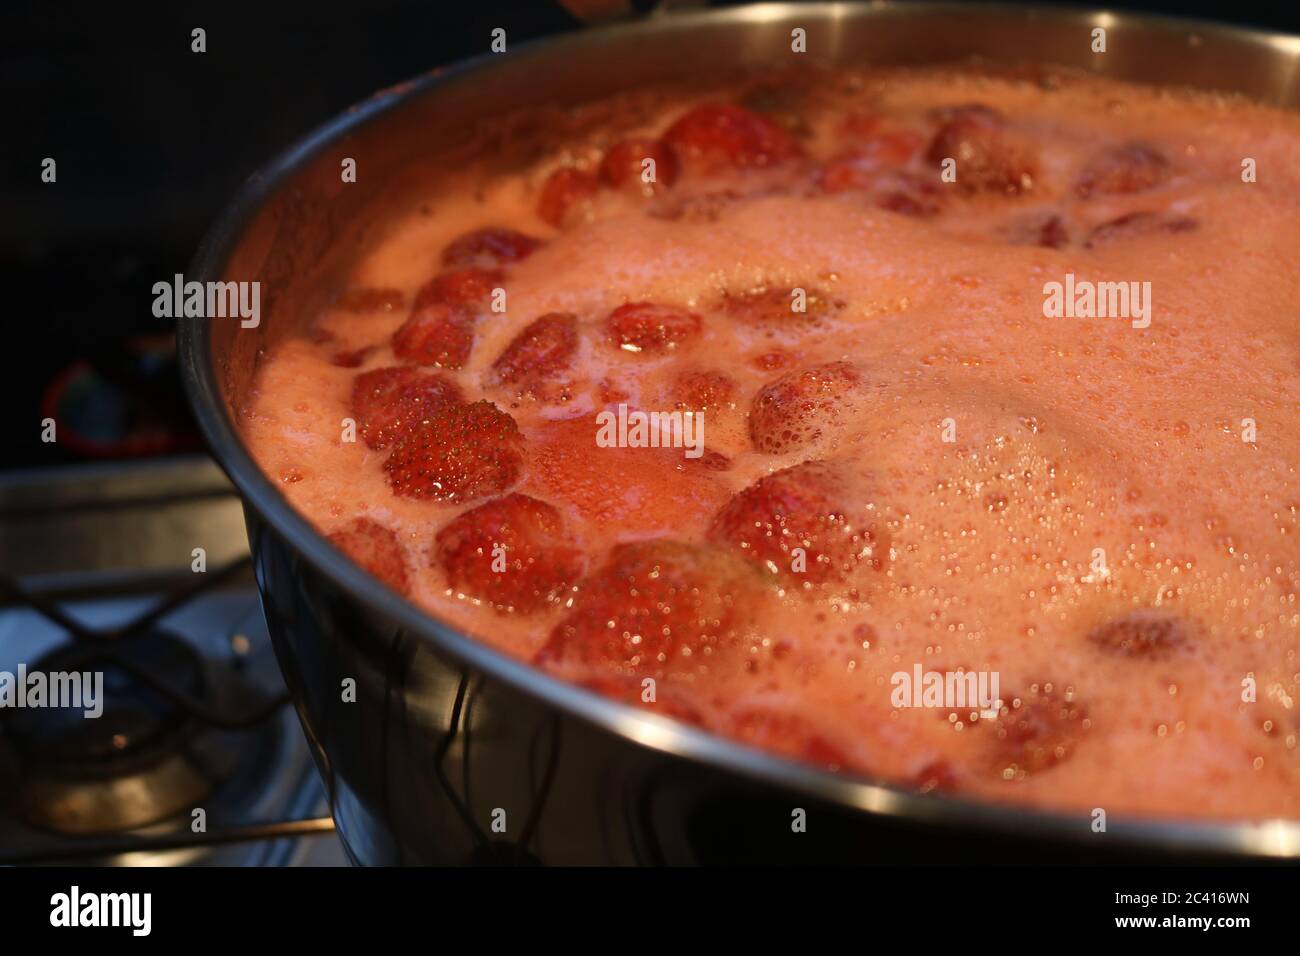 Strawberry jam being made at home reaching a rolling boil Stock Photo